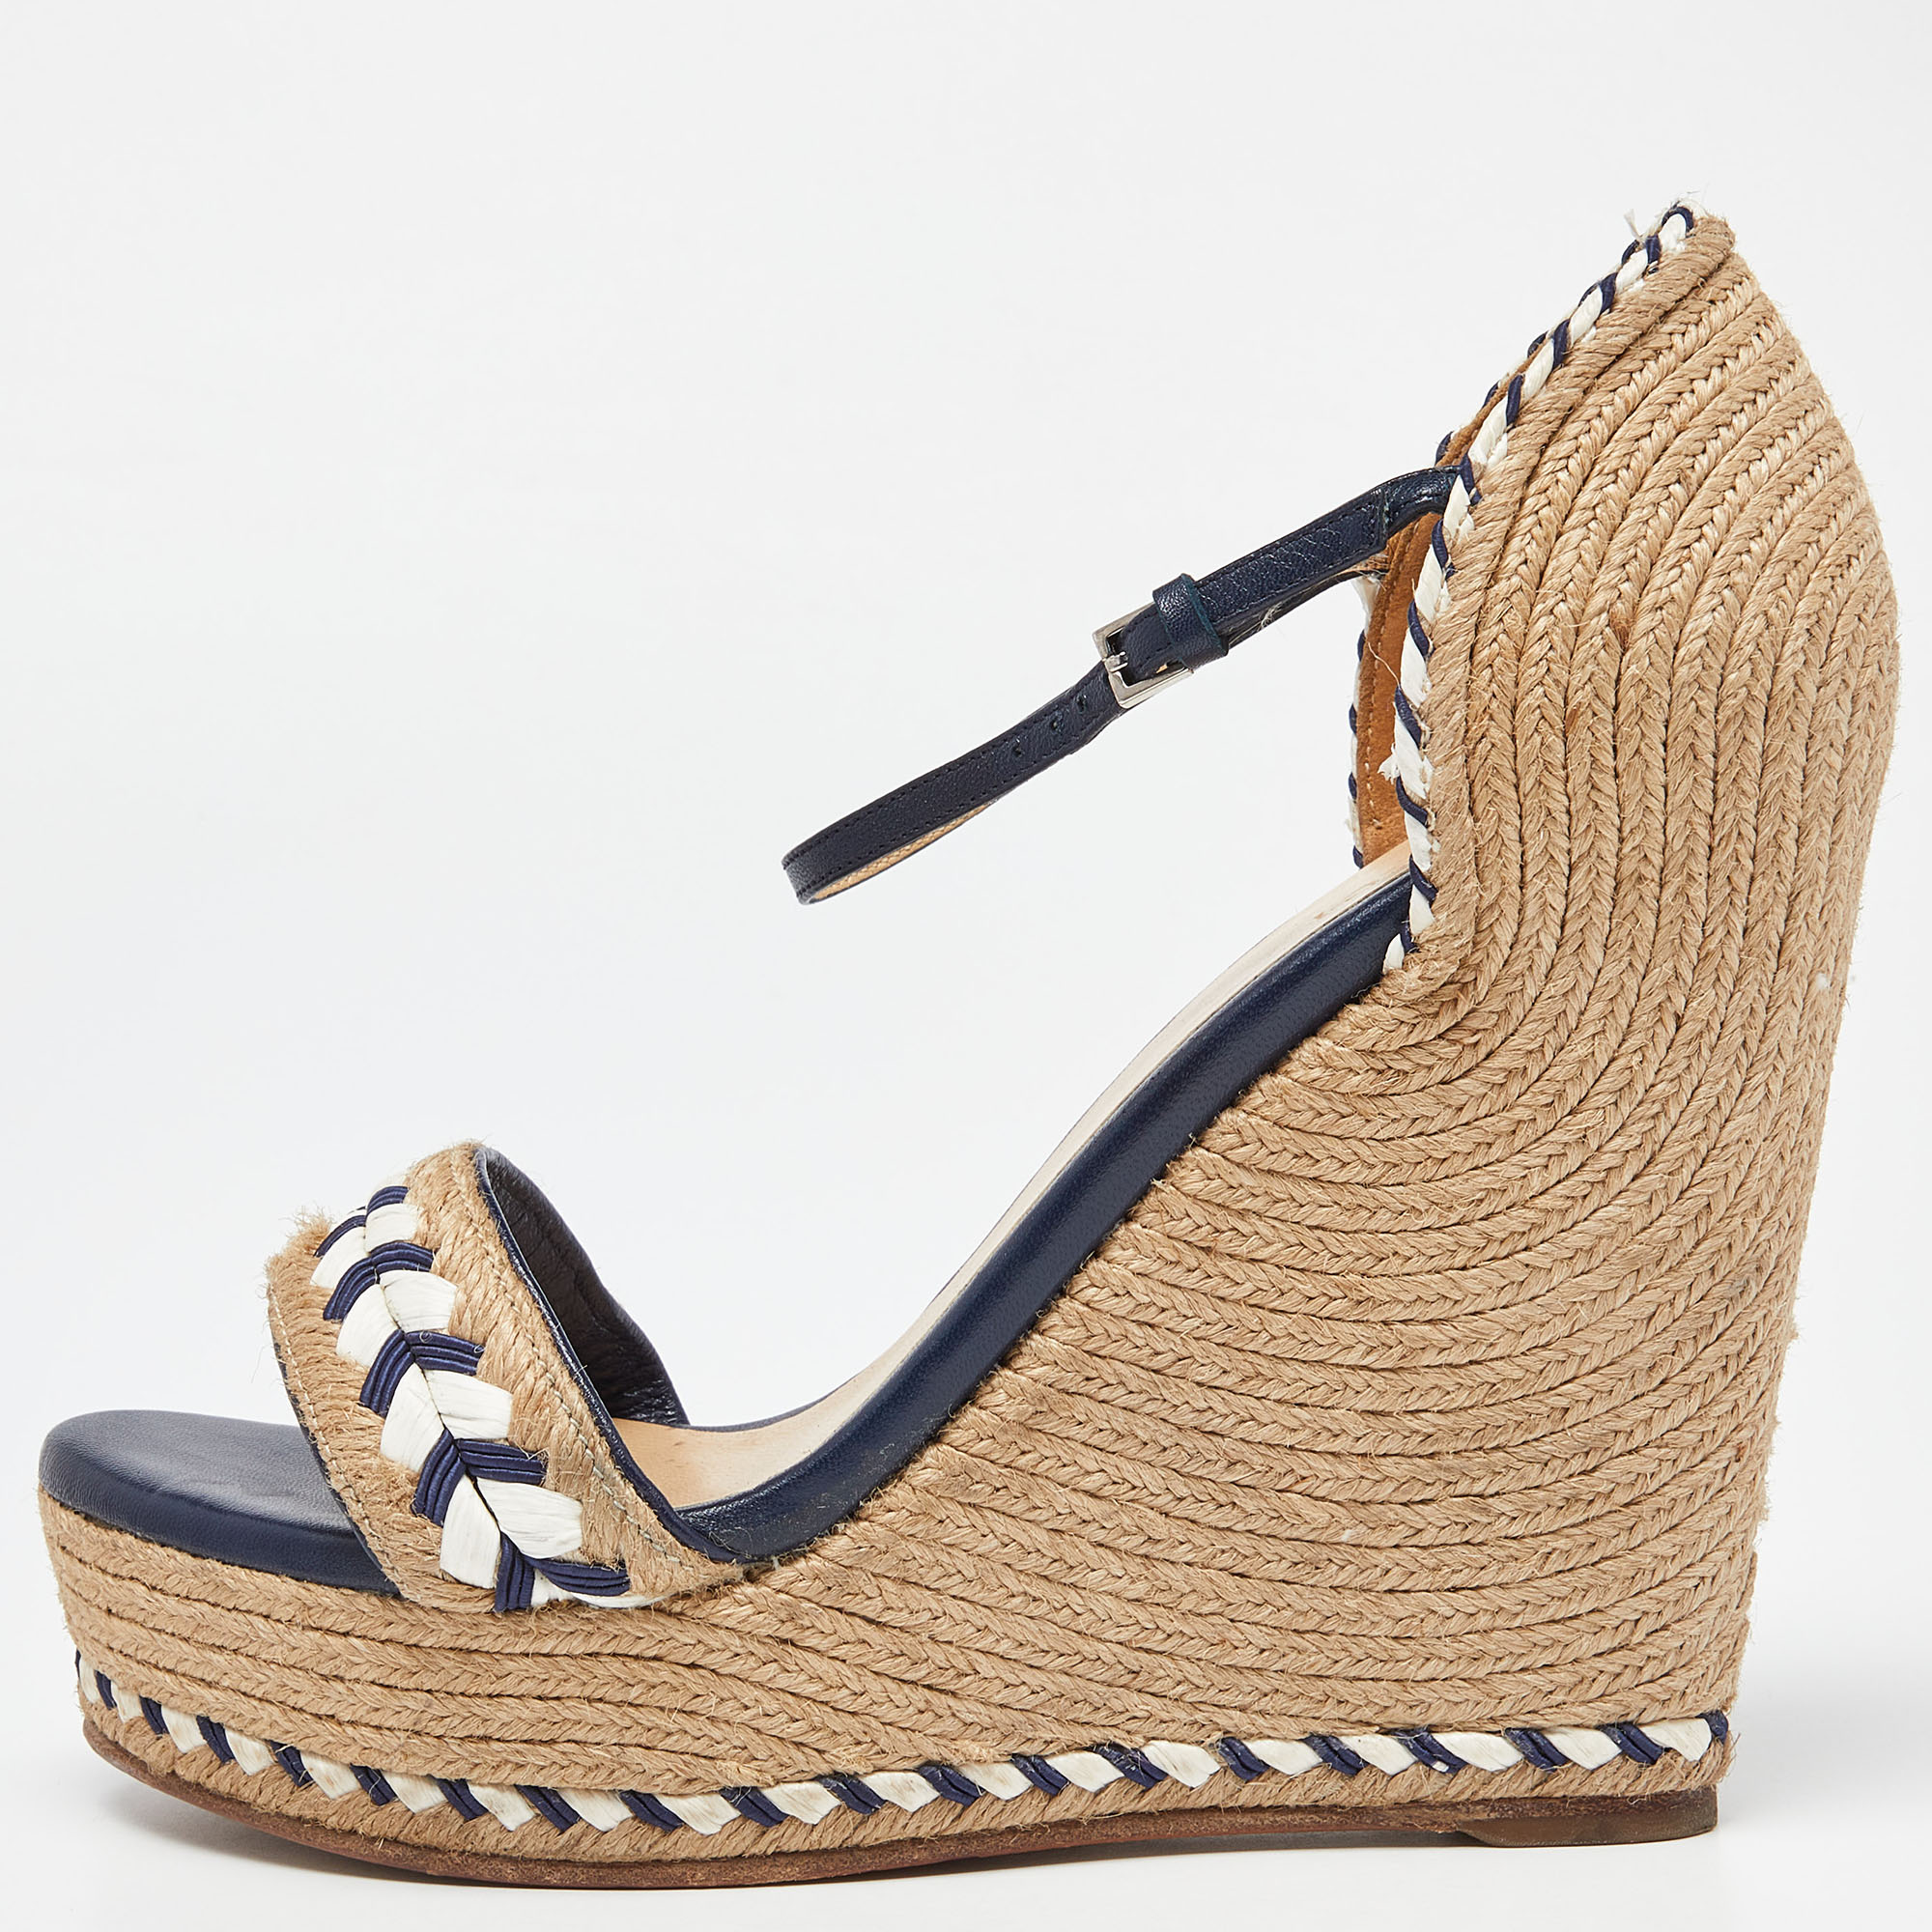 Pre-owned Gucci Beige/blue Jute And Leather Crystal Embellished Espadrille Wedge Sandals Size 39.5